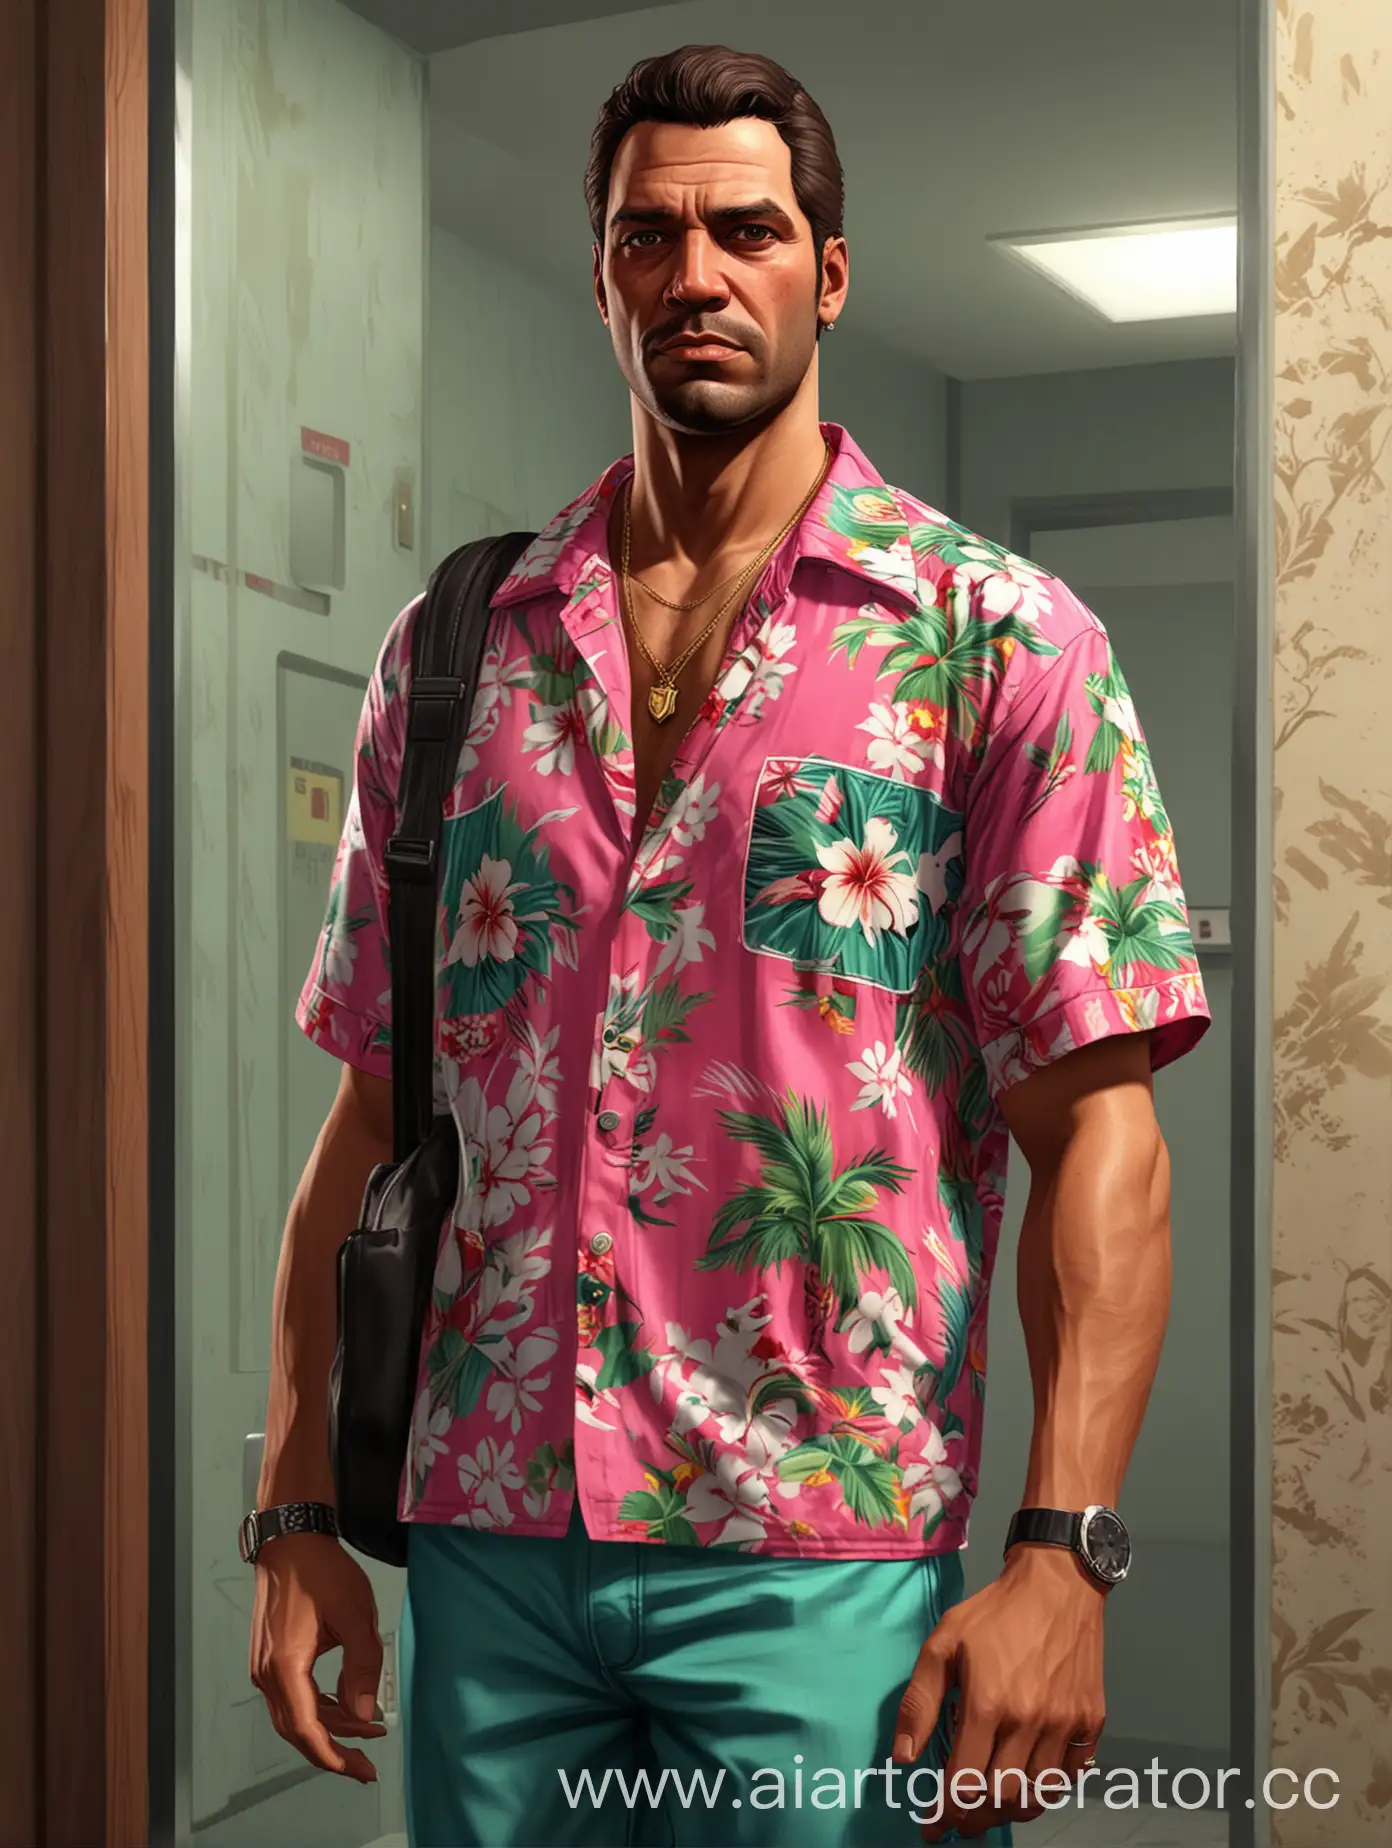 GTA-Vice-City-Character-with-Sports-Bag-in-Elevator